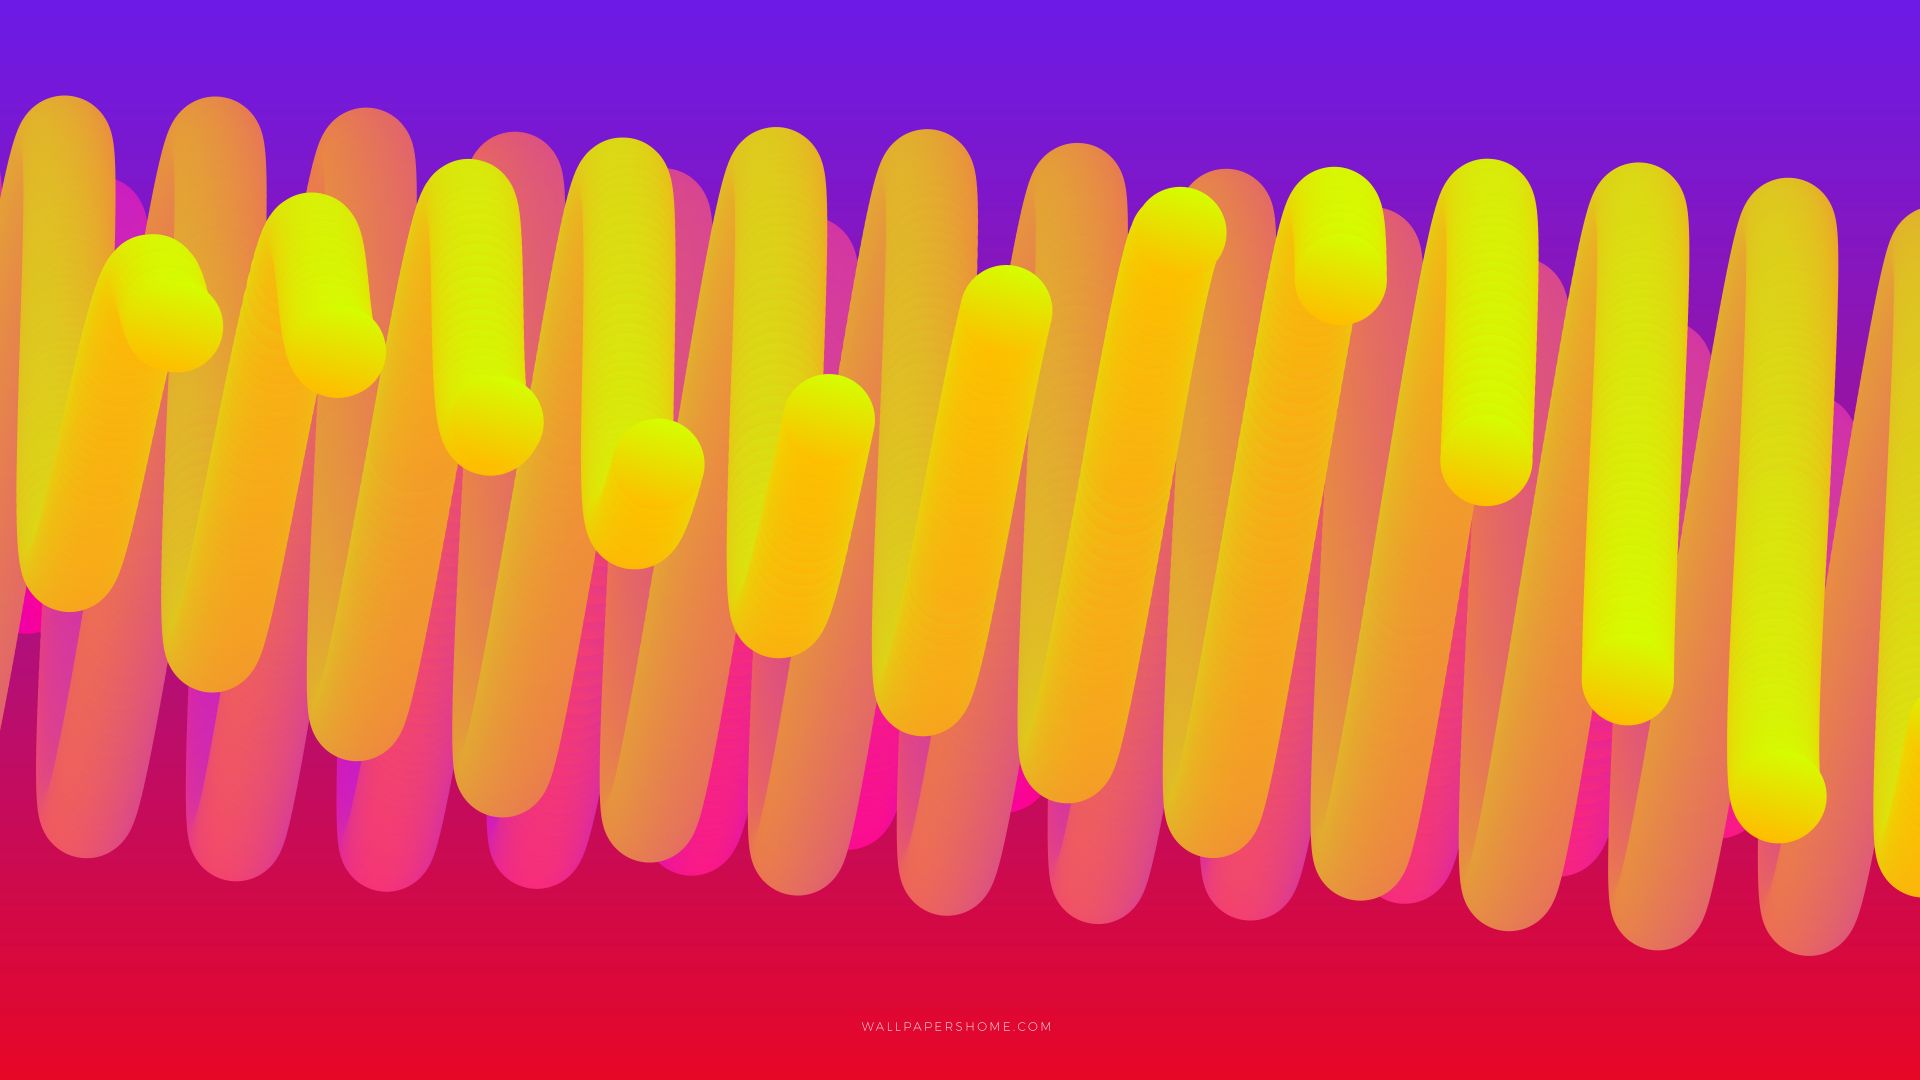 abstract, 3D, colorful, 8k (horizontal)